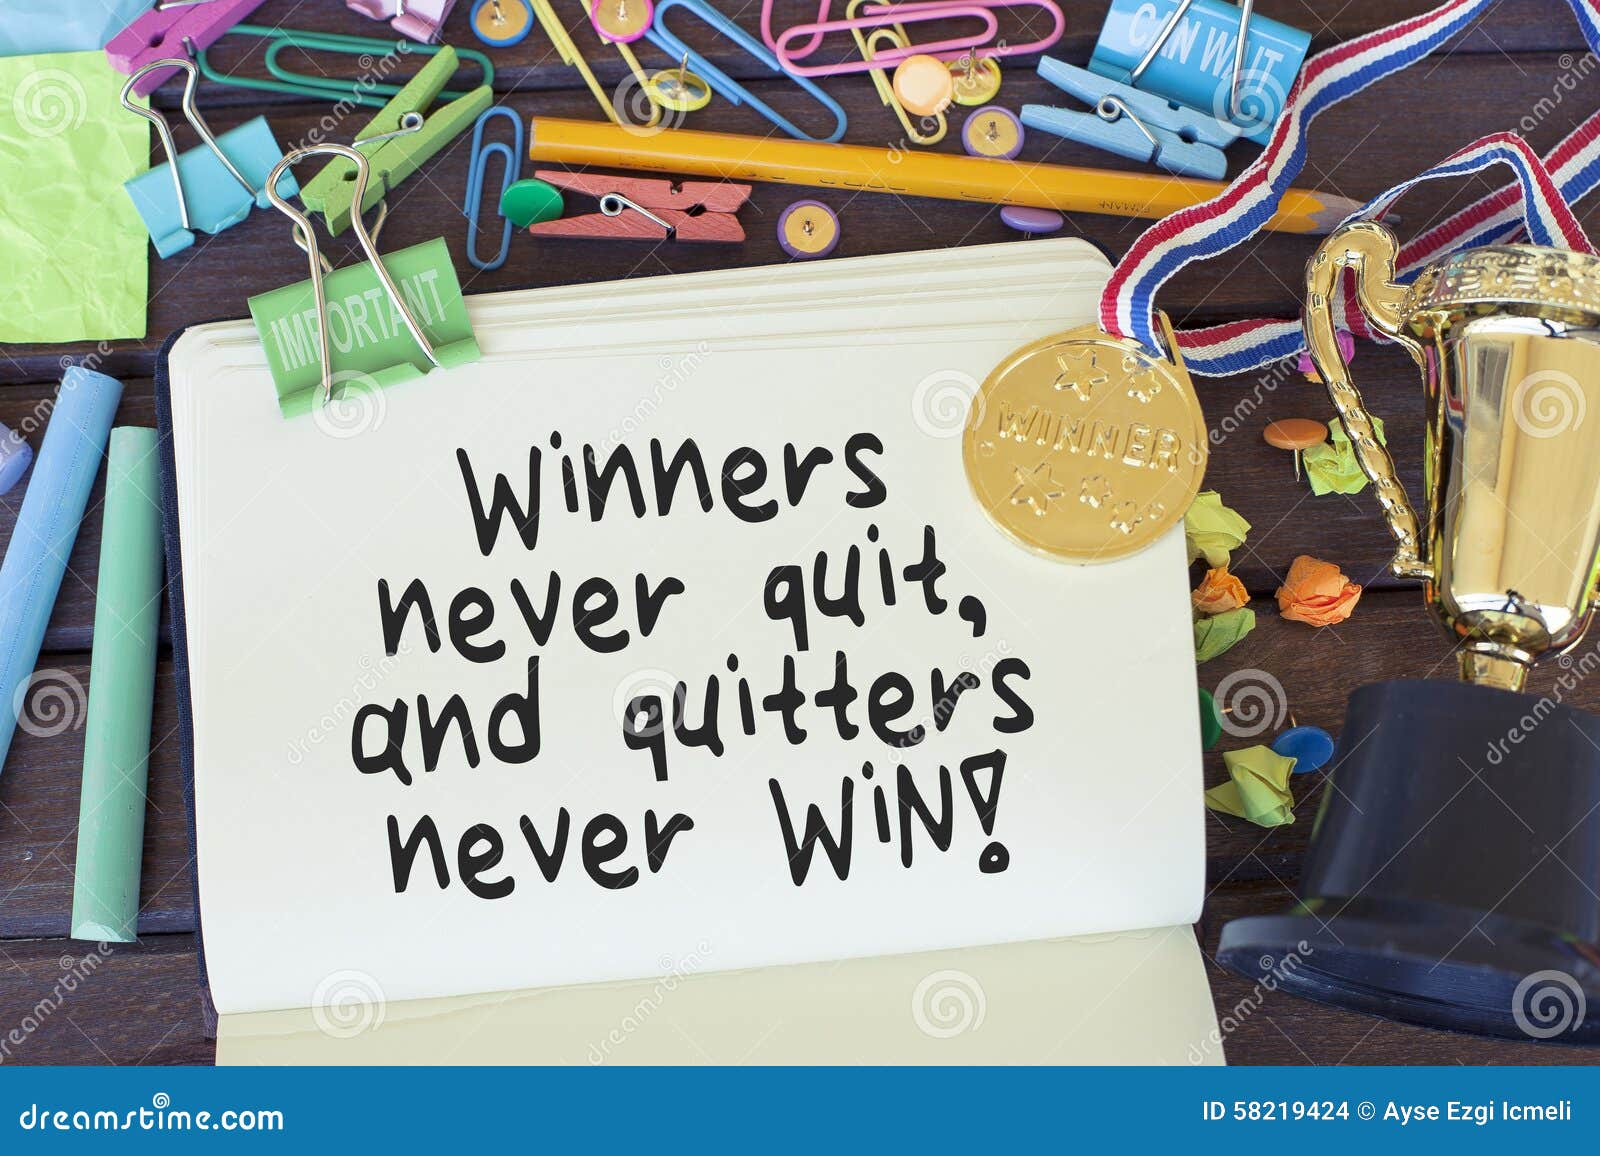 winners never quit and quitters never win meaning